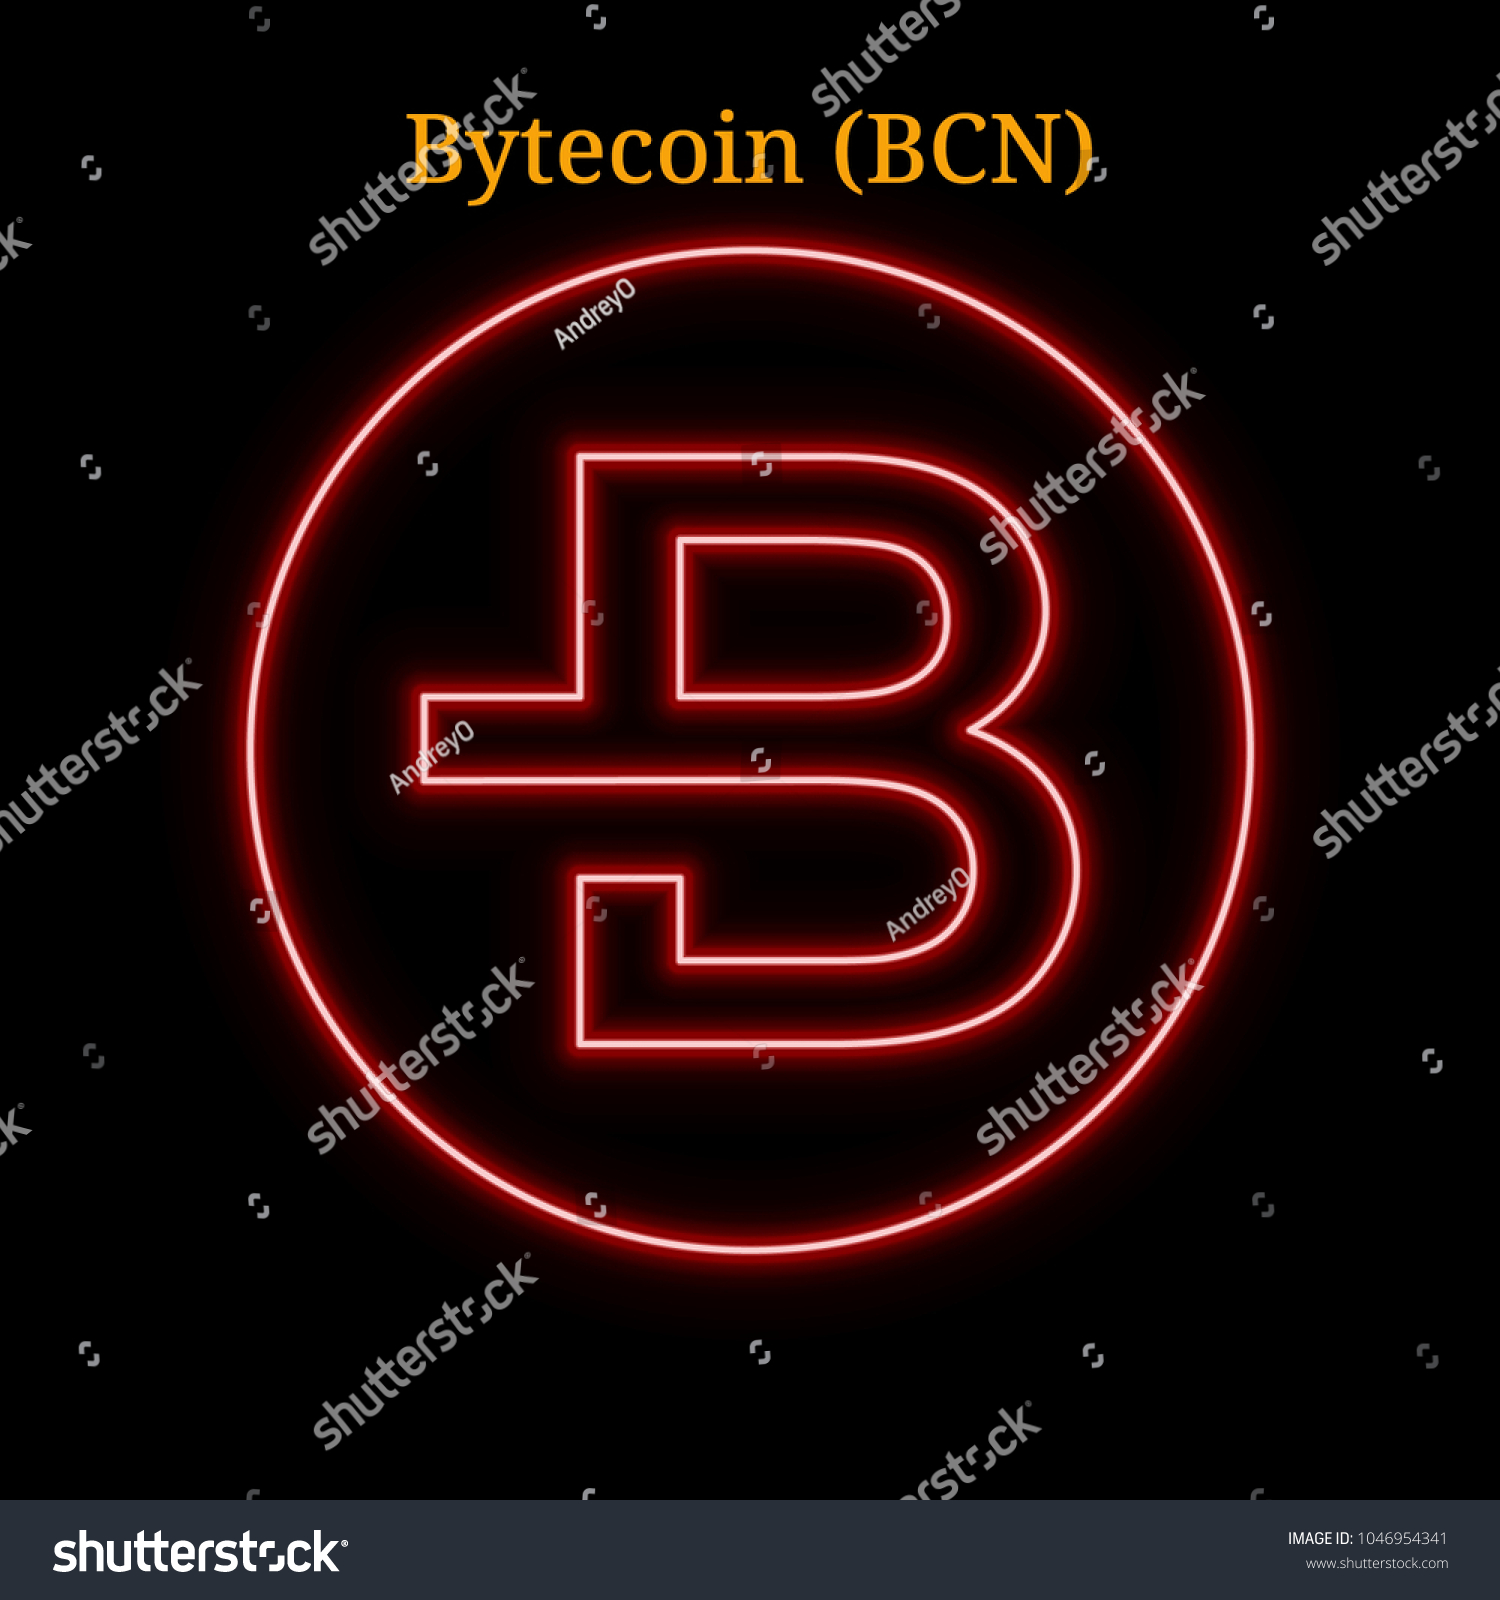 SVG of Red neon Bytecoin (BCN) cryptocurrency symbol. Vector illustration eps10 isolated on black background svg